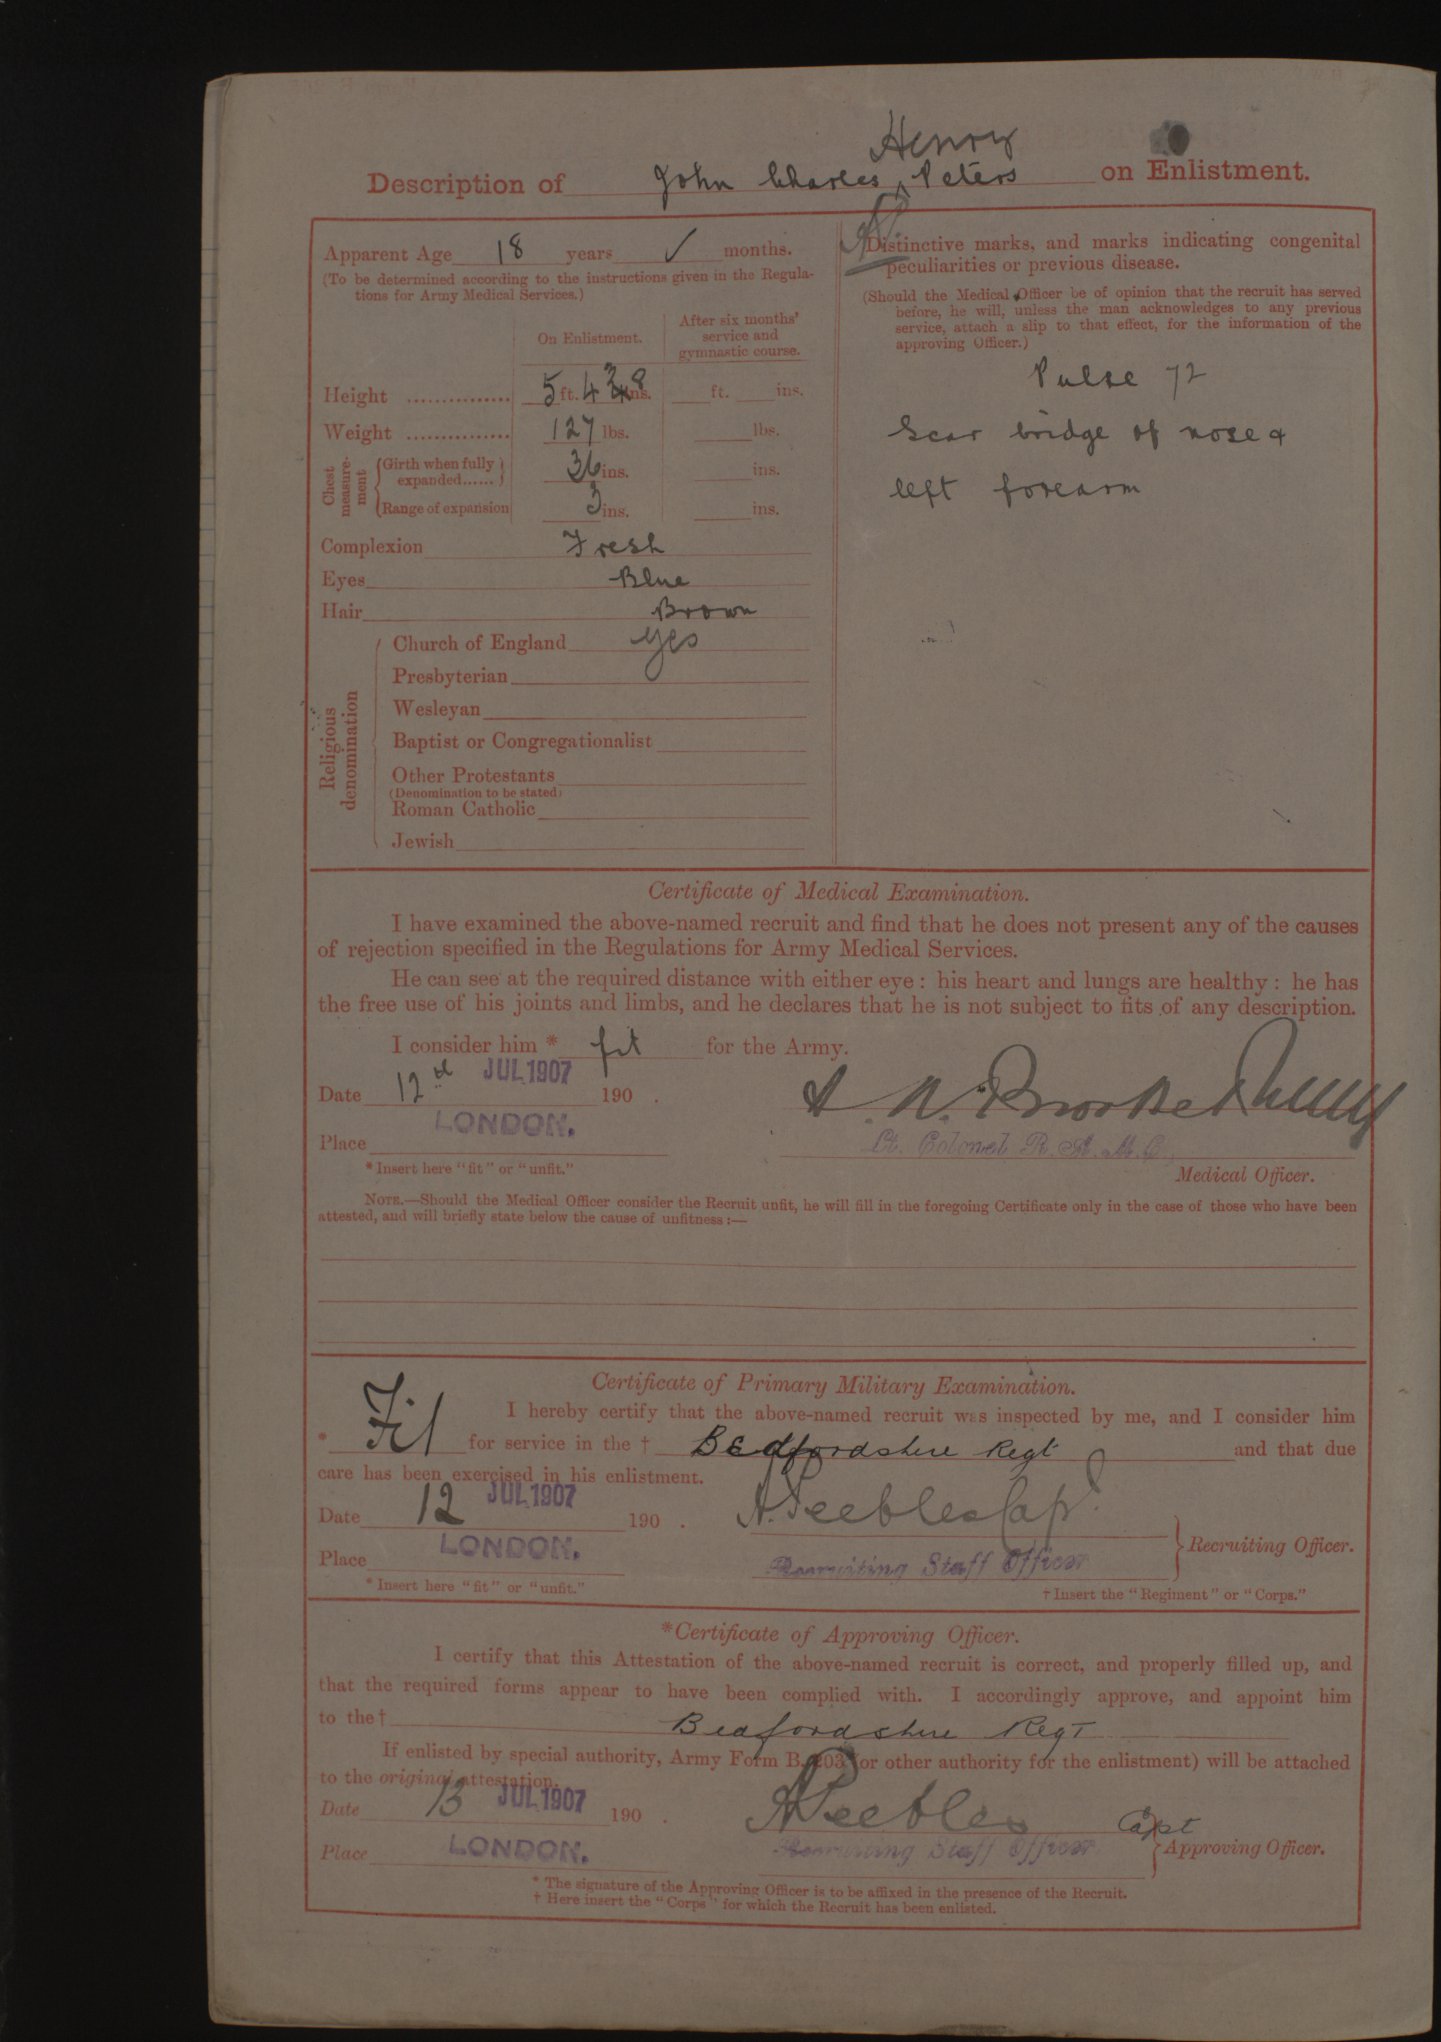 John Peters army records from 1907 showing he had blue eyes, brown hair and a fresh complexion as well as a scar on his nose and left forearm.